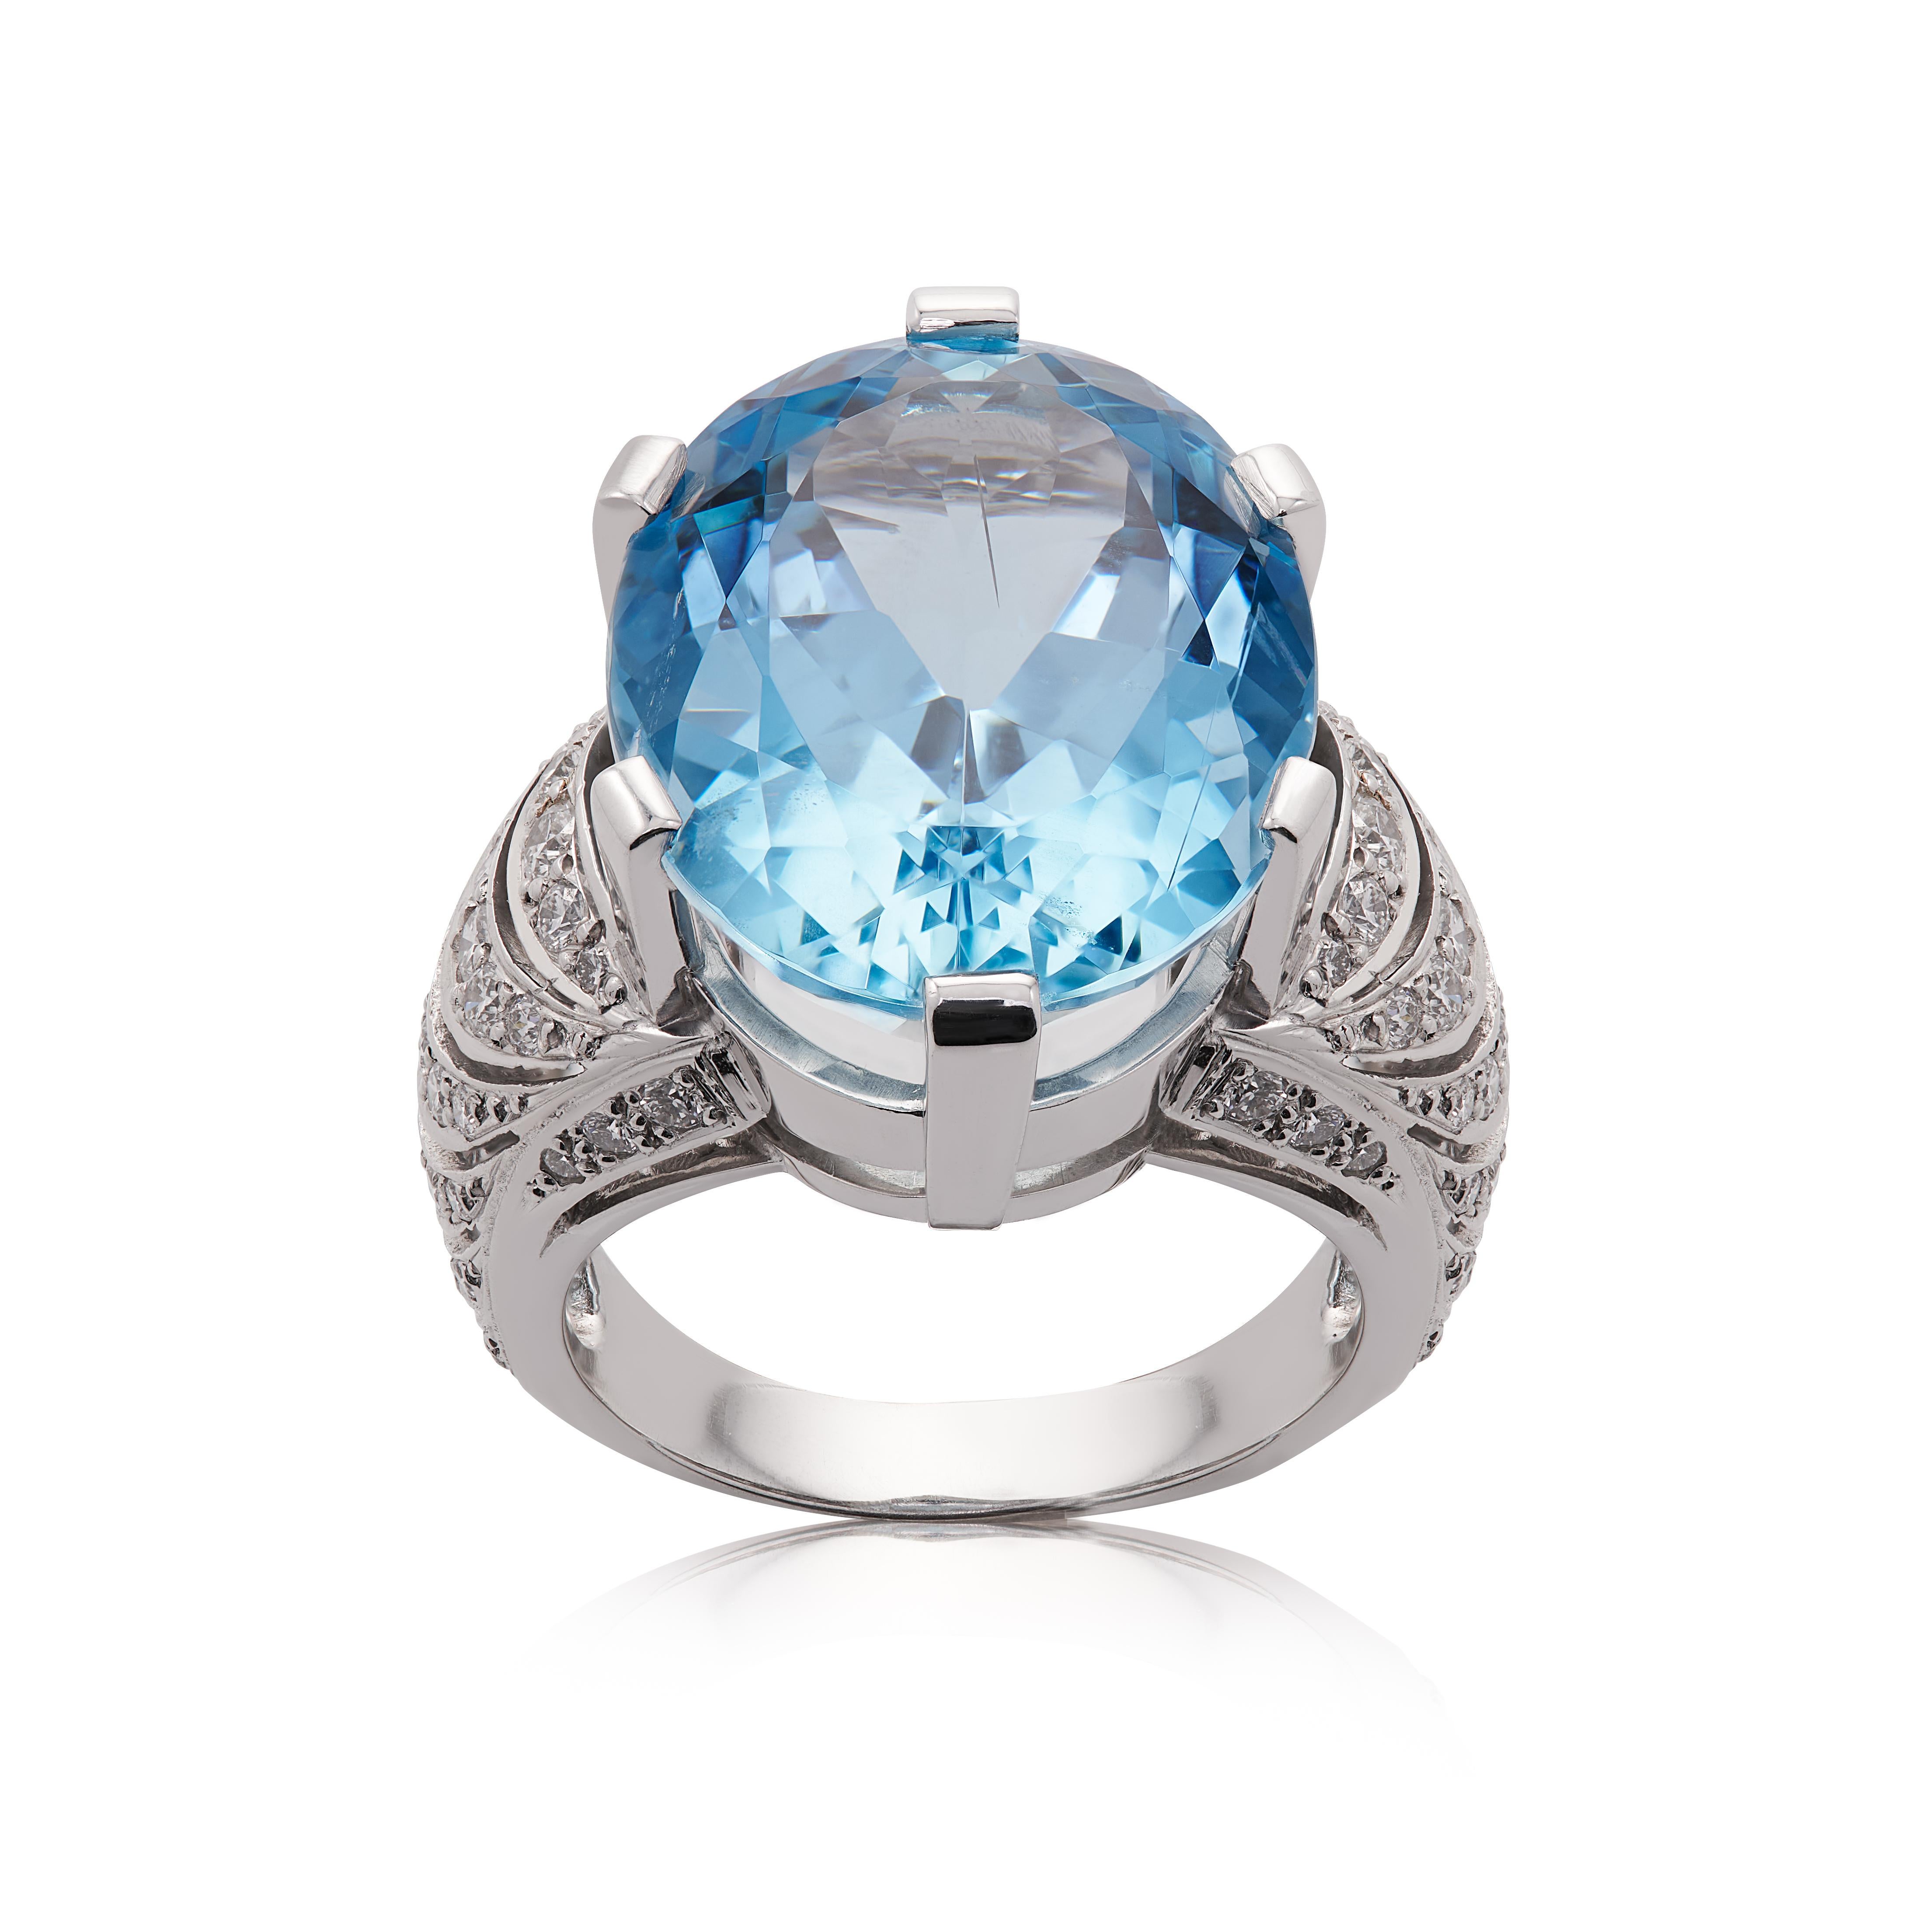 E Wolfe & Co Handmade 18 carat White Gold Aquamarine and Diamond Cocktail Ring. The aquamarine centre stone weighs 17.86 carats and has intricate detail to the sides and shank which have been set with .84 carats of G colour and VS clarity round